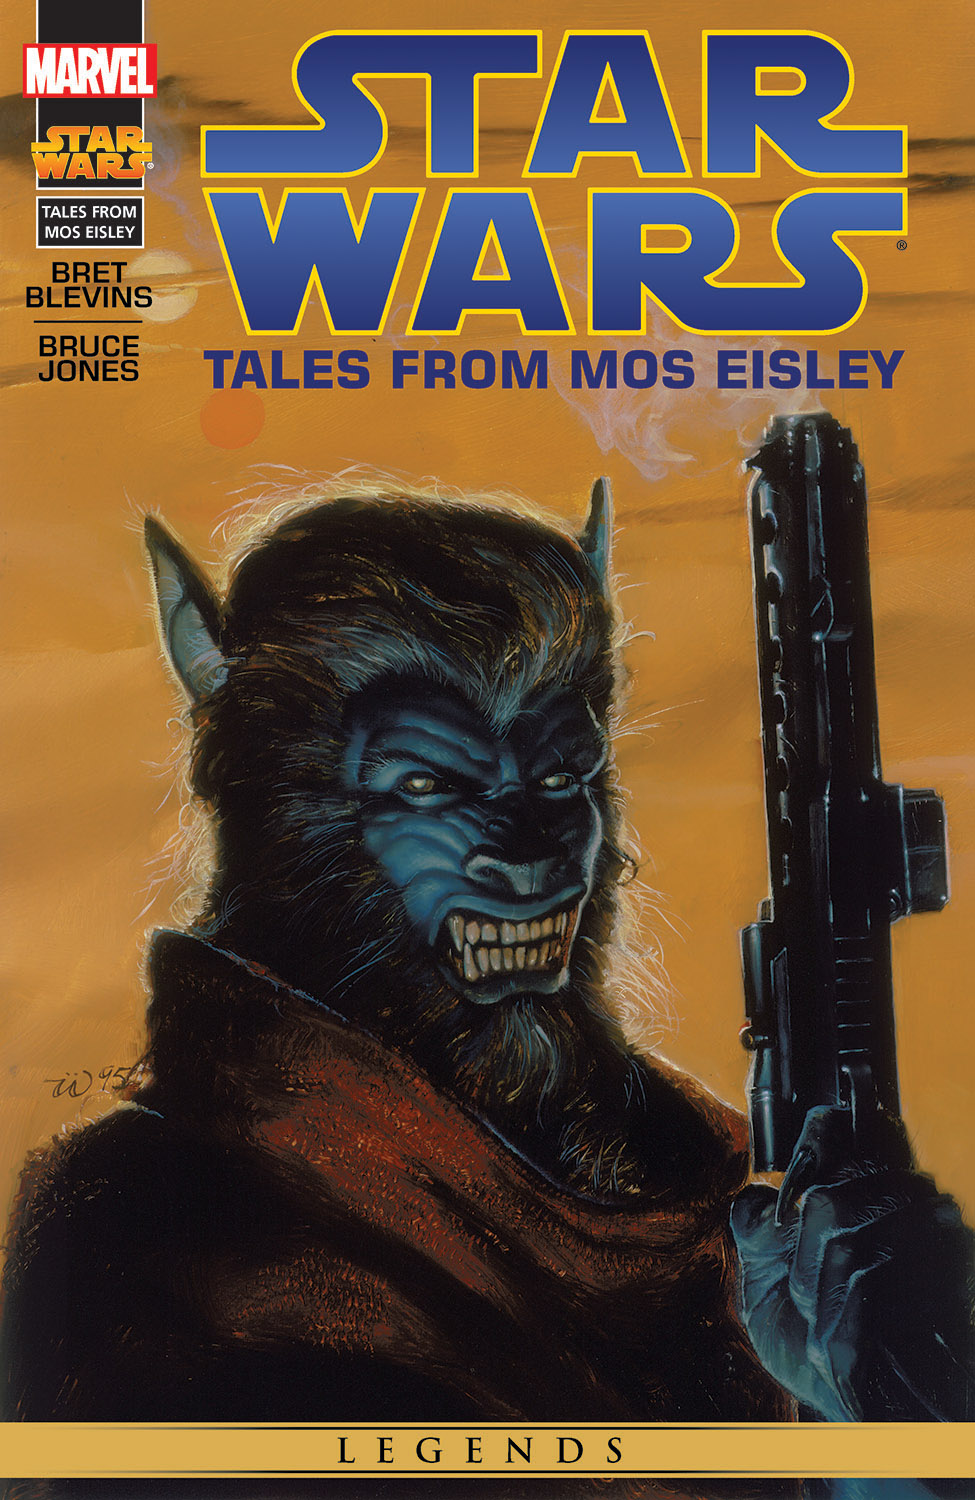 Star Wars: Tales from Mos Eisley (1996) #1